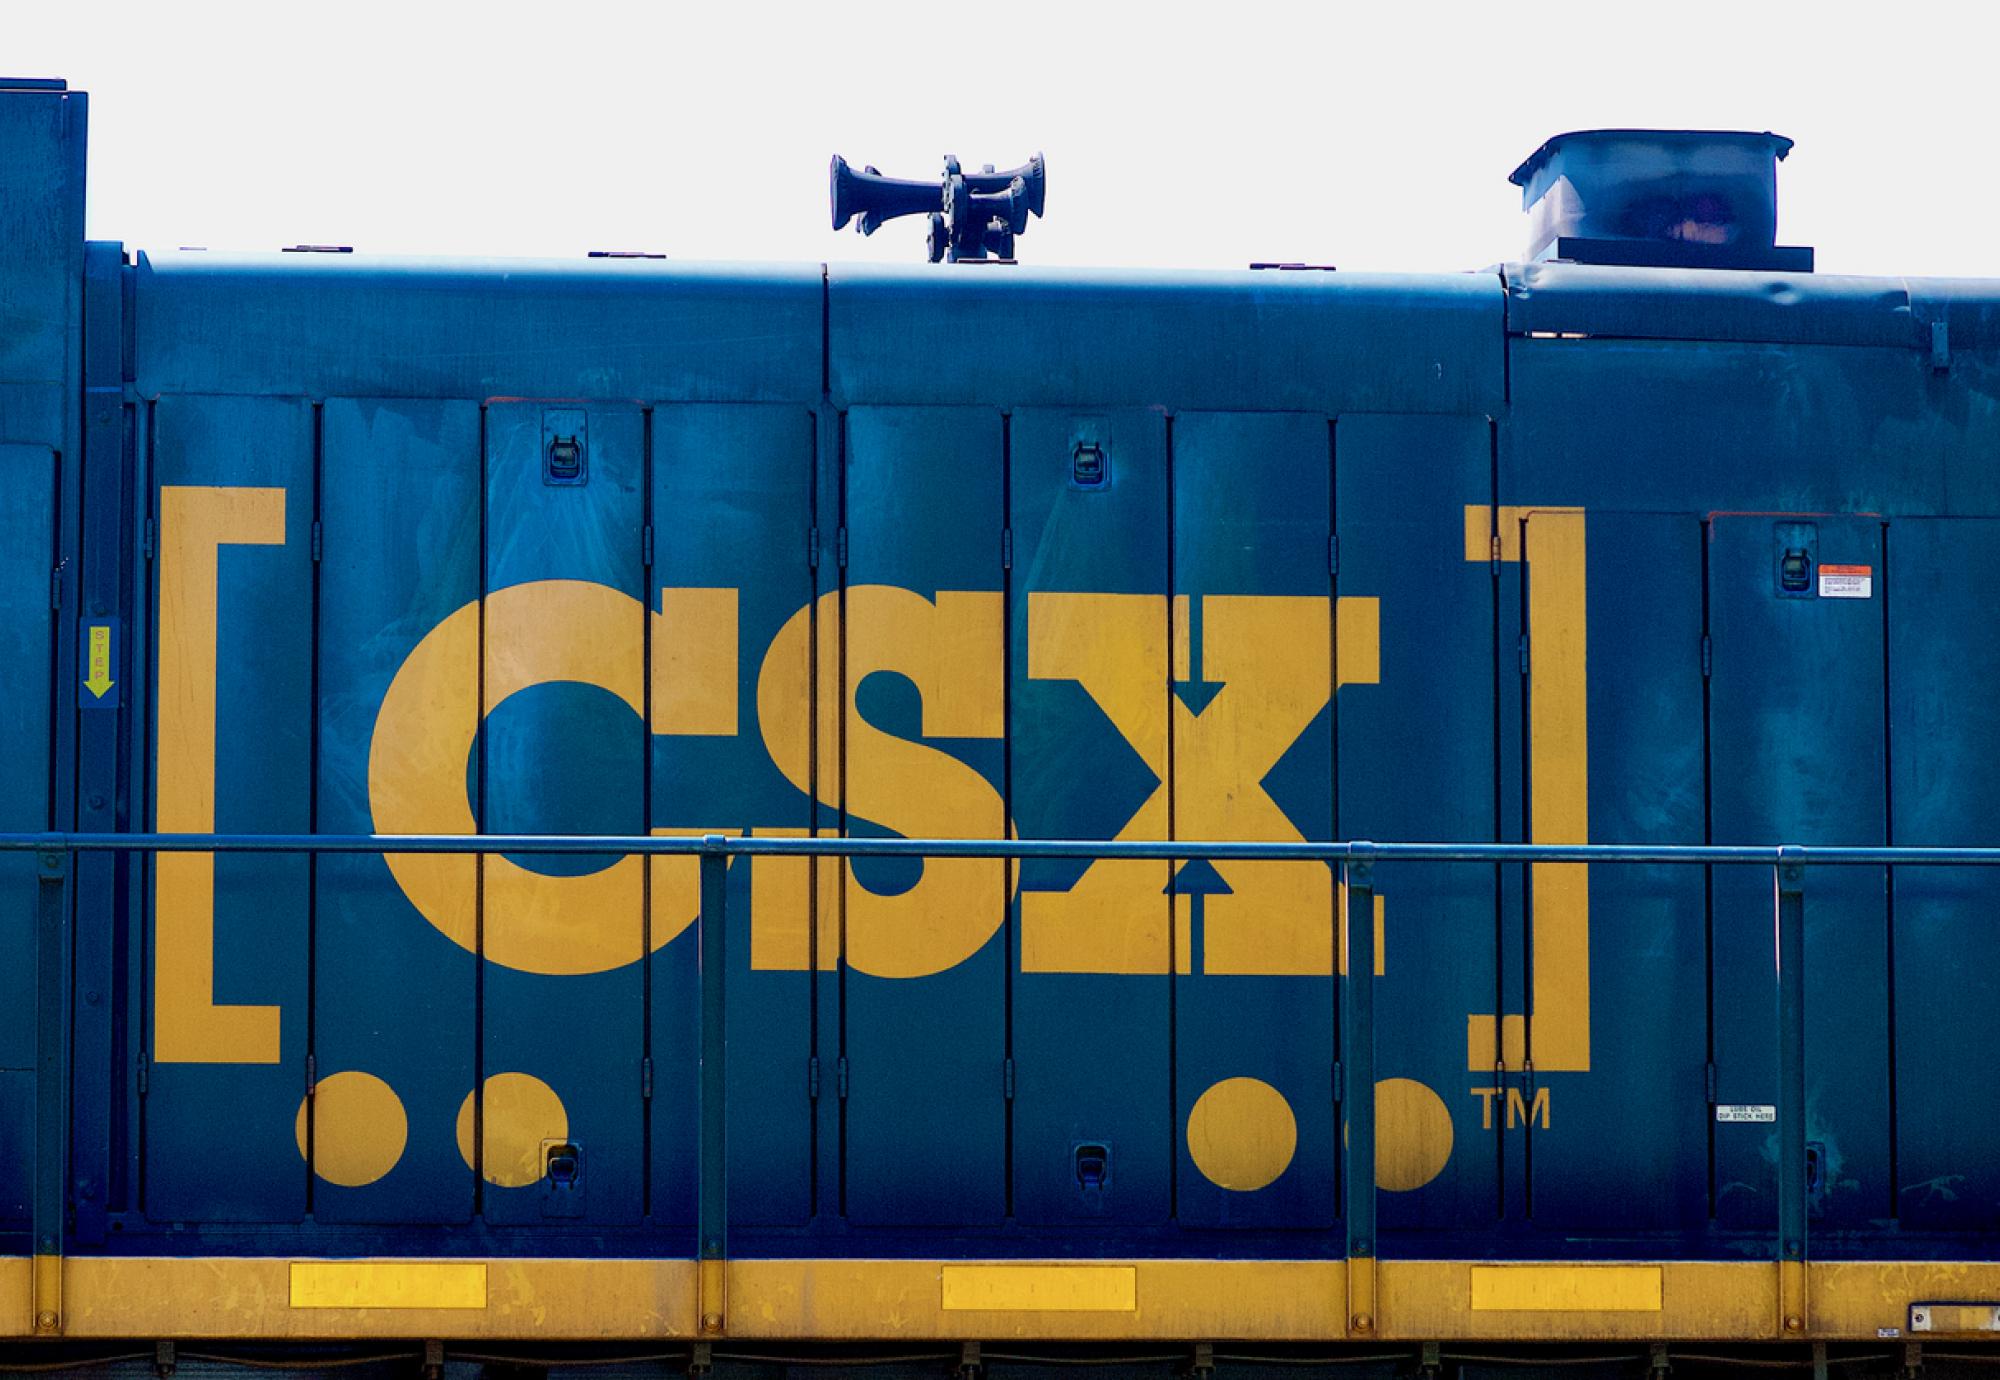 Siemens Mobility and CSX explore digital solutions for freight rail